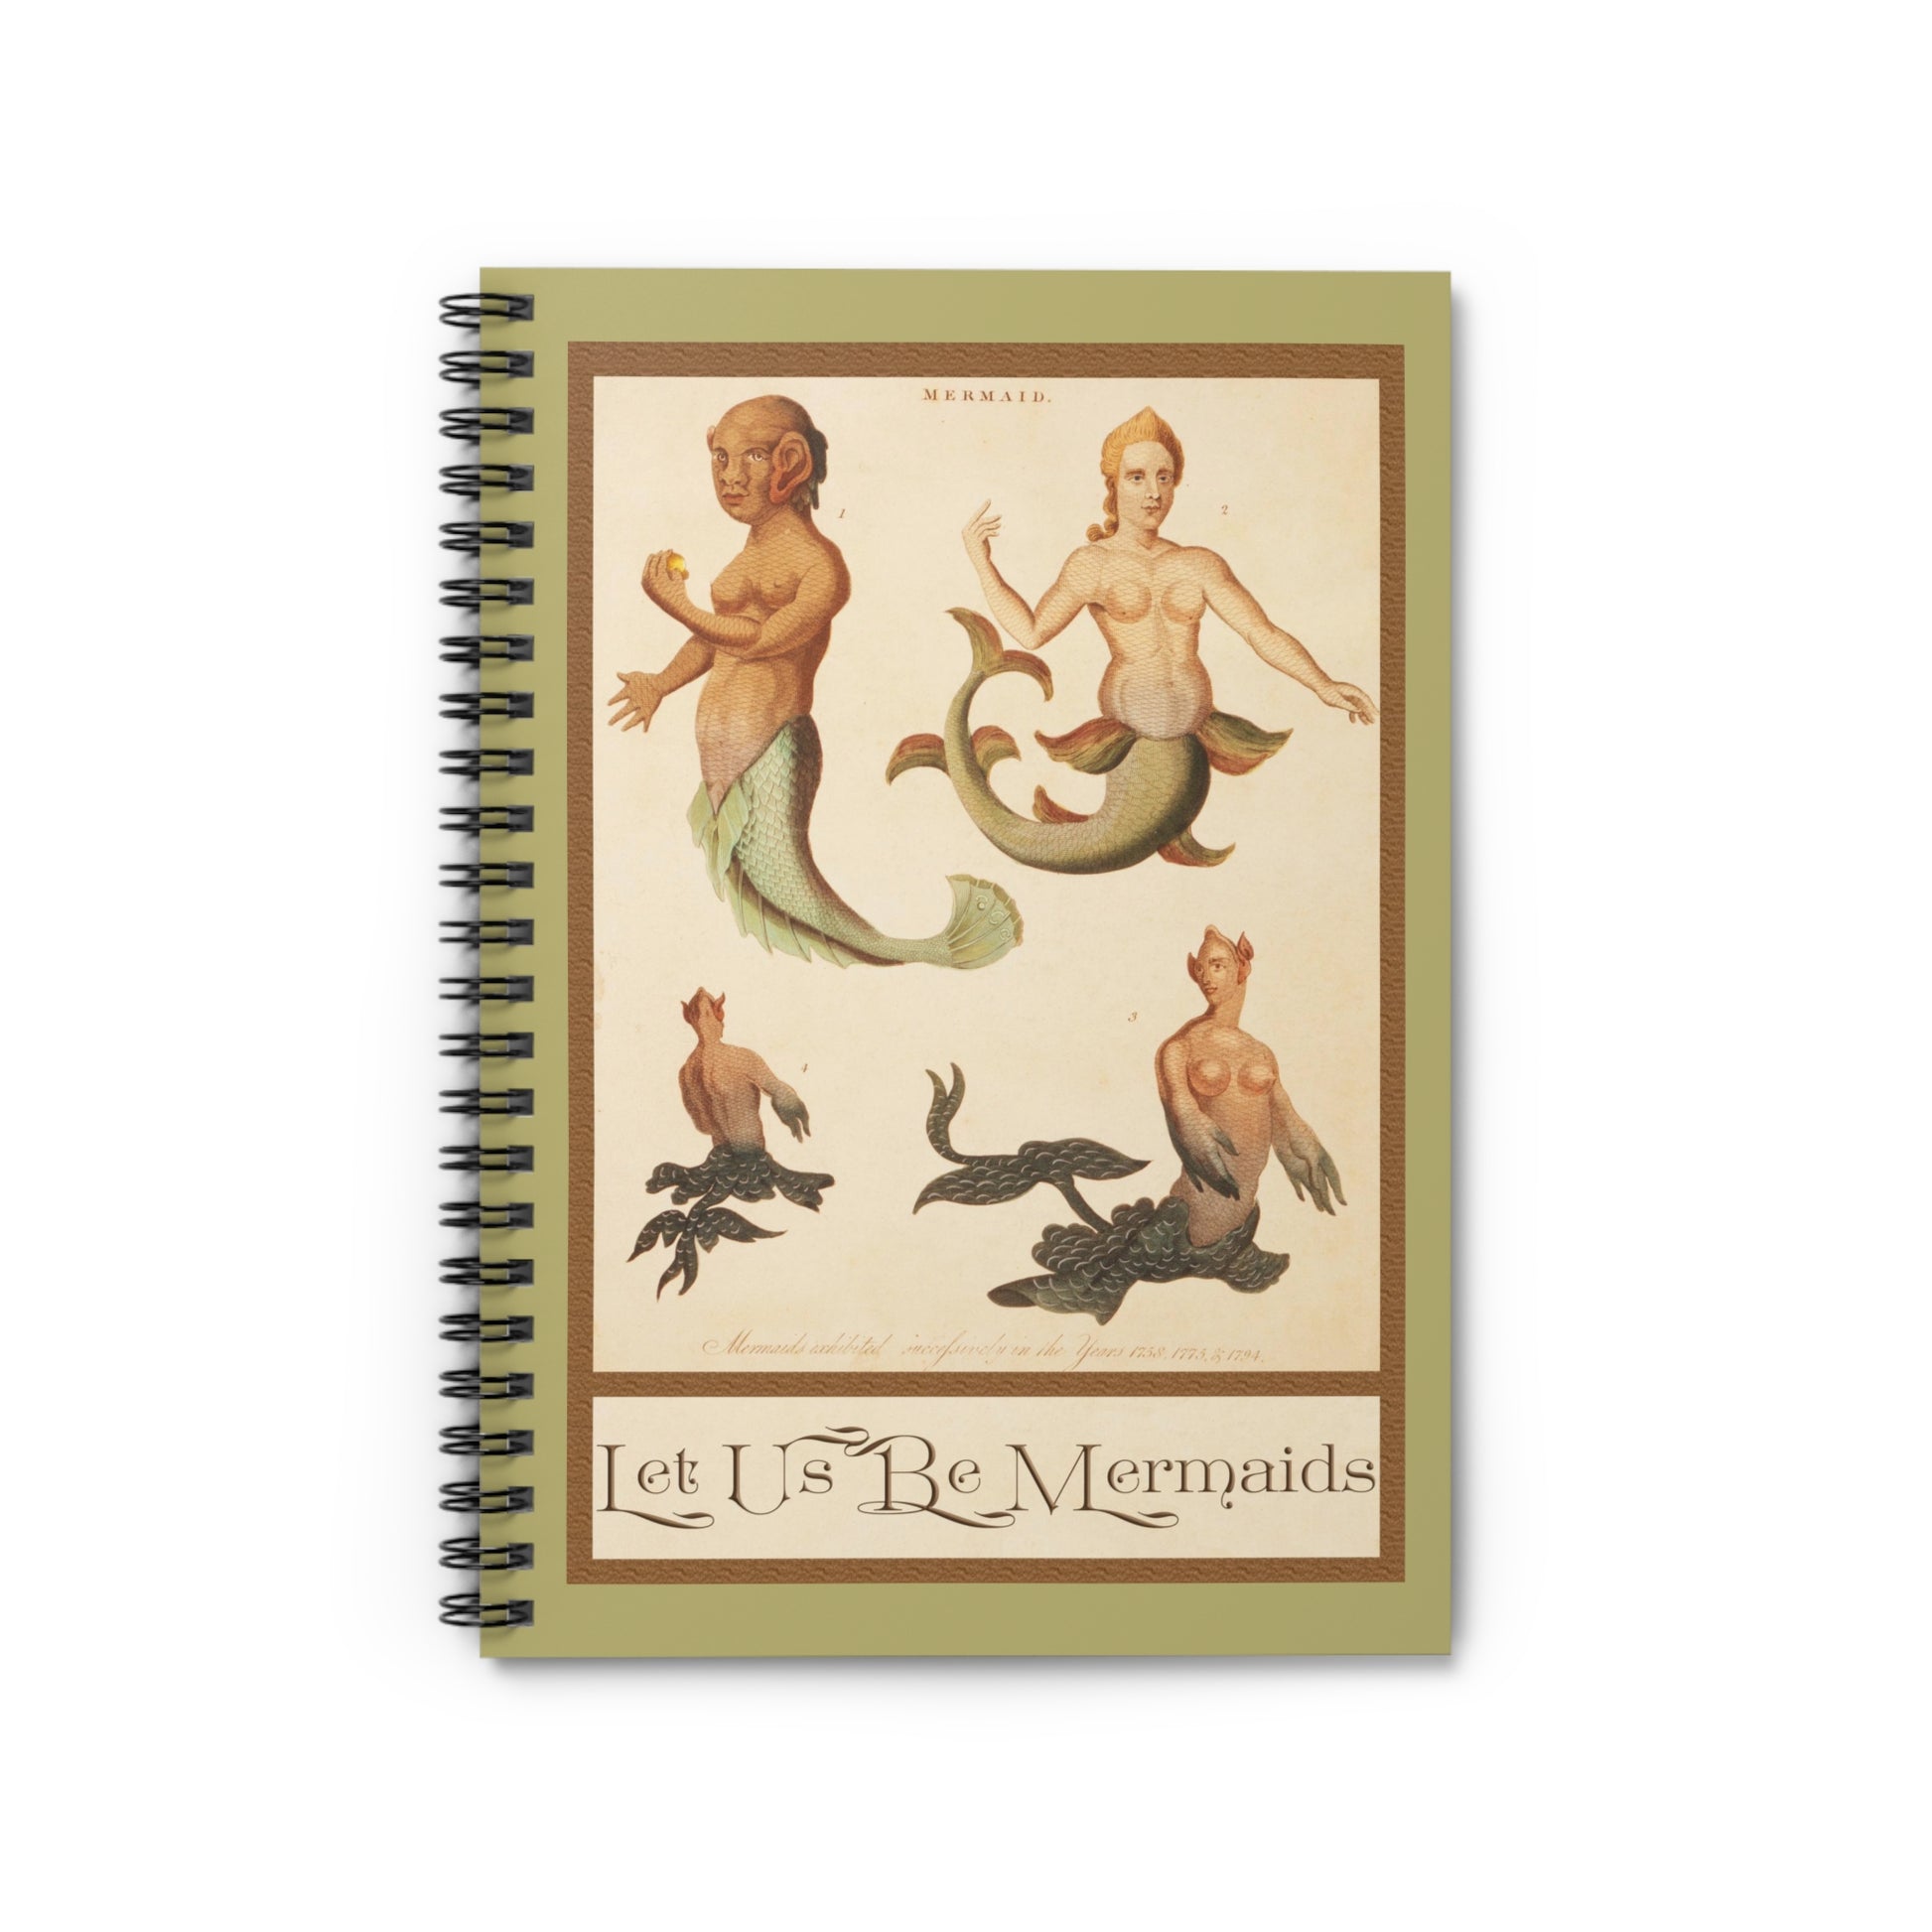 Front of notebook with vintage illustrations of mermaids from 1817 Encyclopedia Londiensis, olive green border with text below that says "Let Us Be Mermaids".